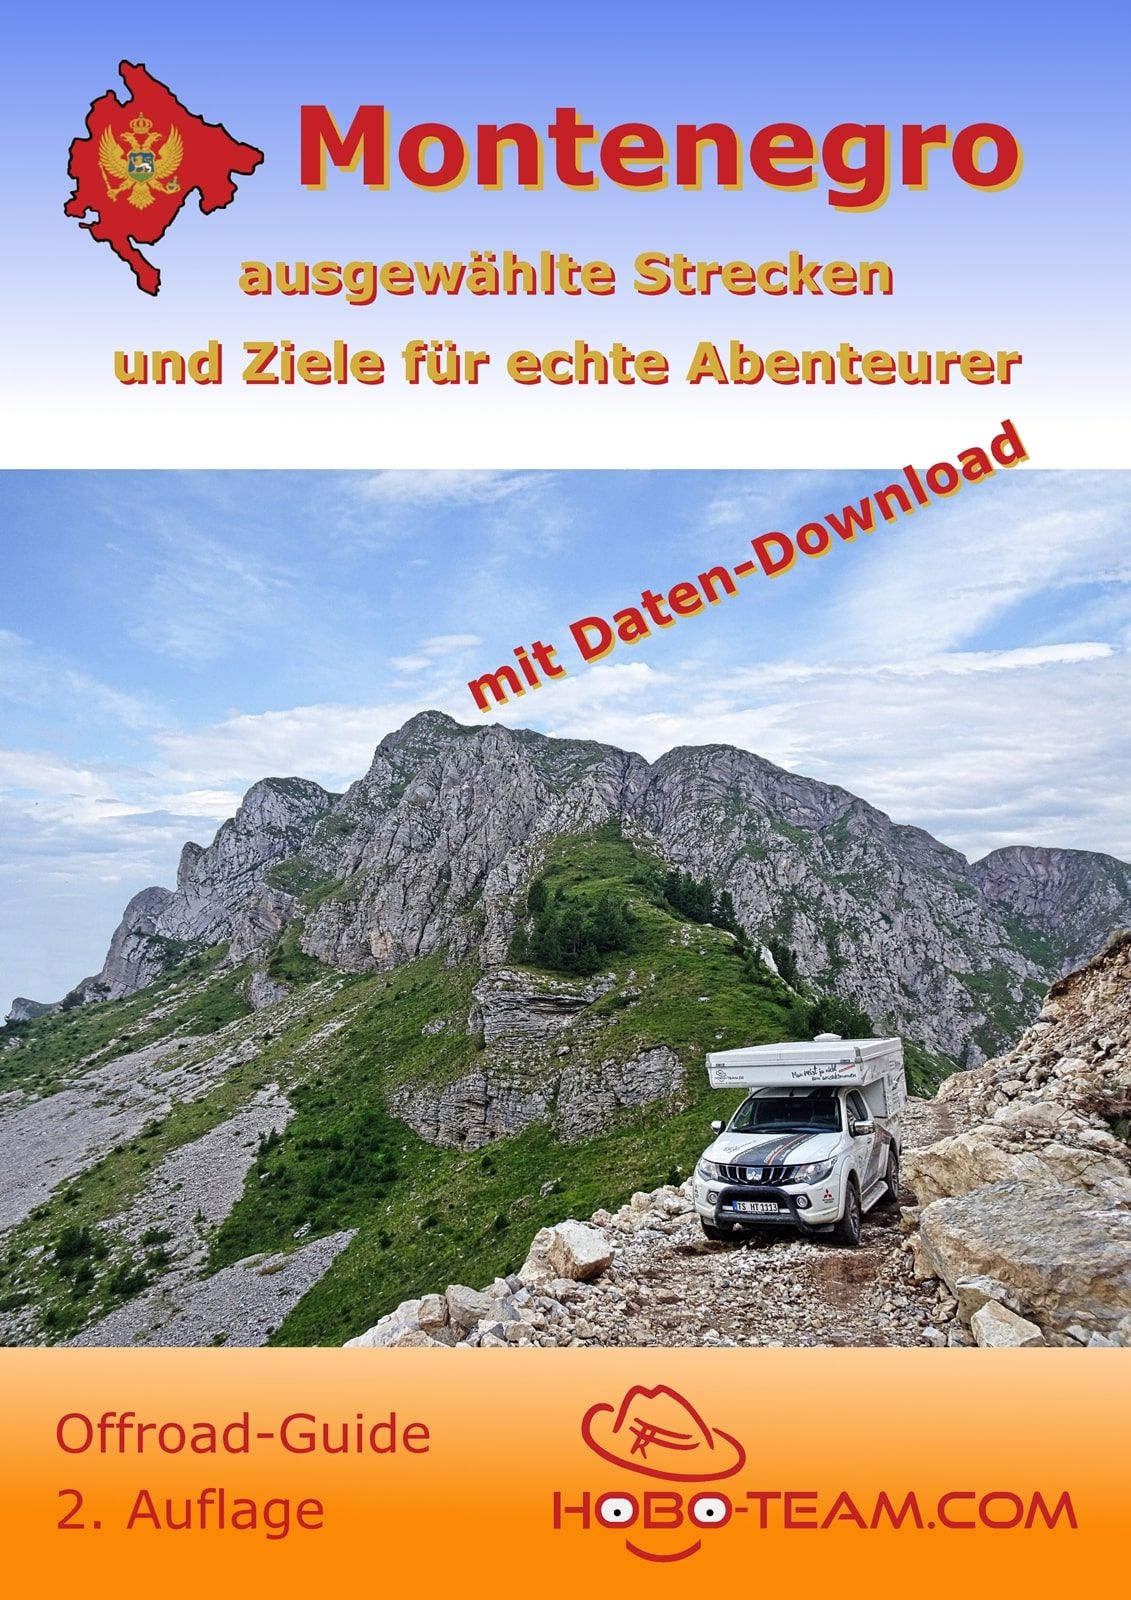 Montenegro Offroad-Guide, 4x4